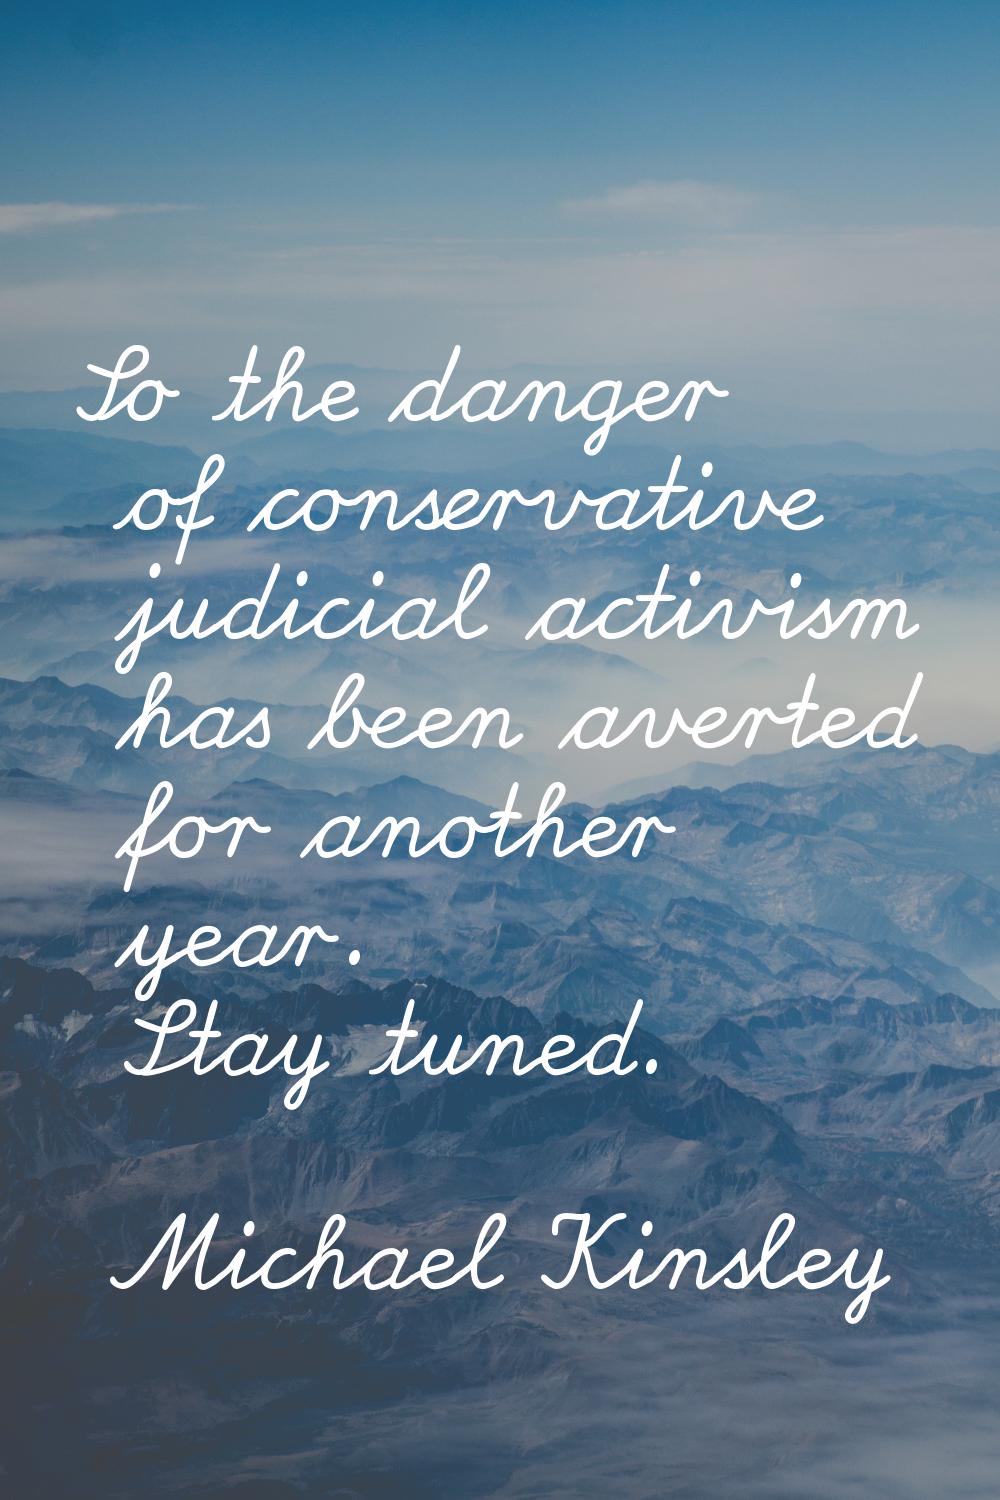 So the danger of conservative judicial activism has been averted for another year. Stay tuned.